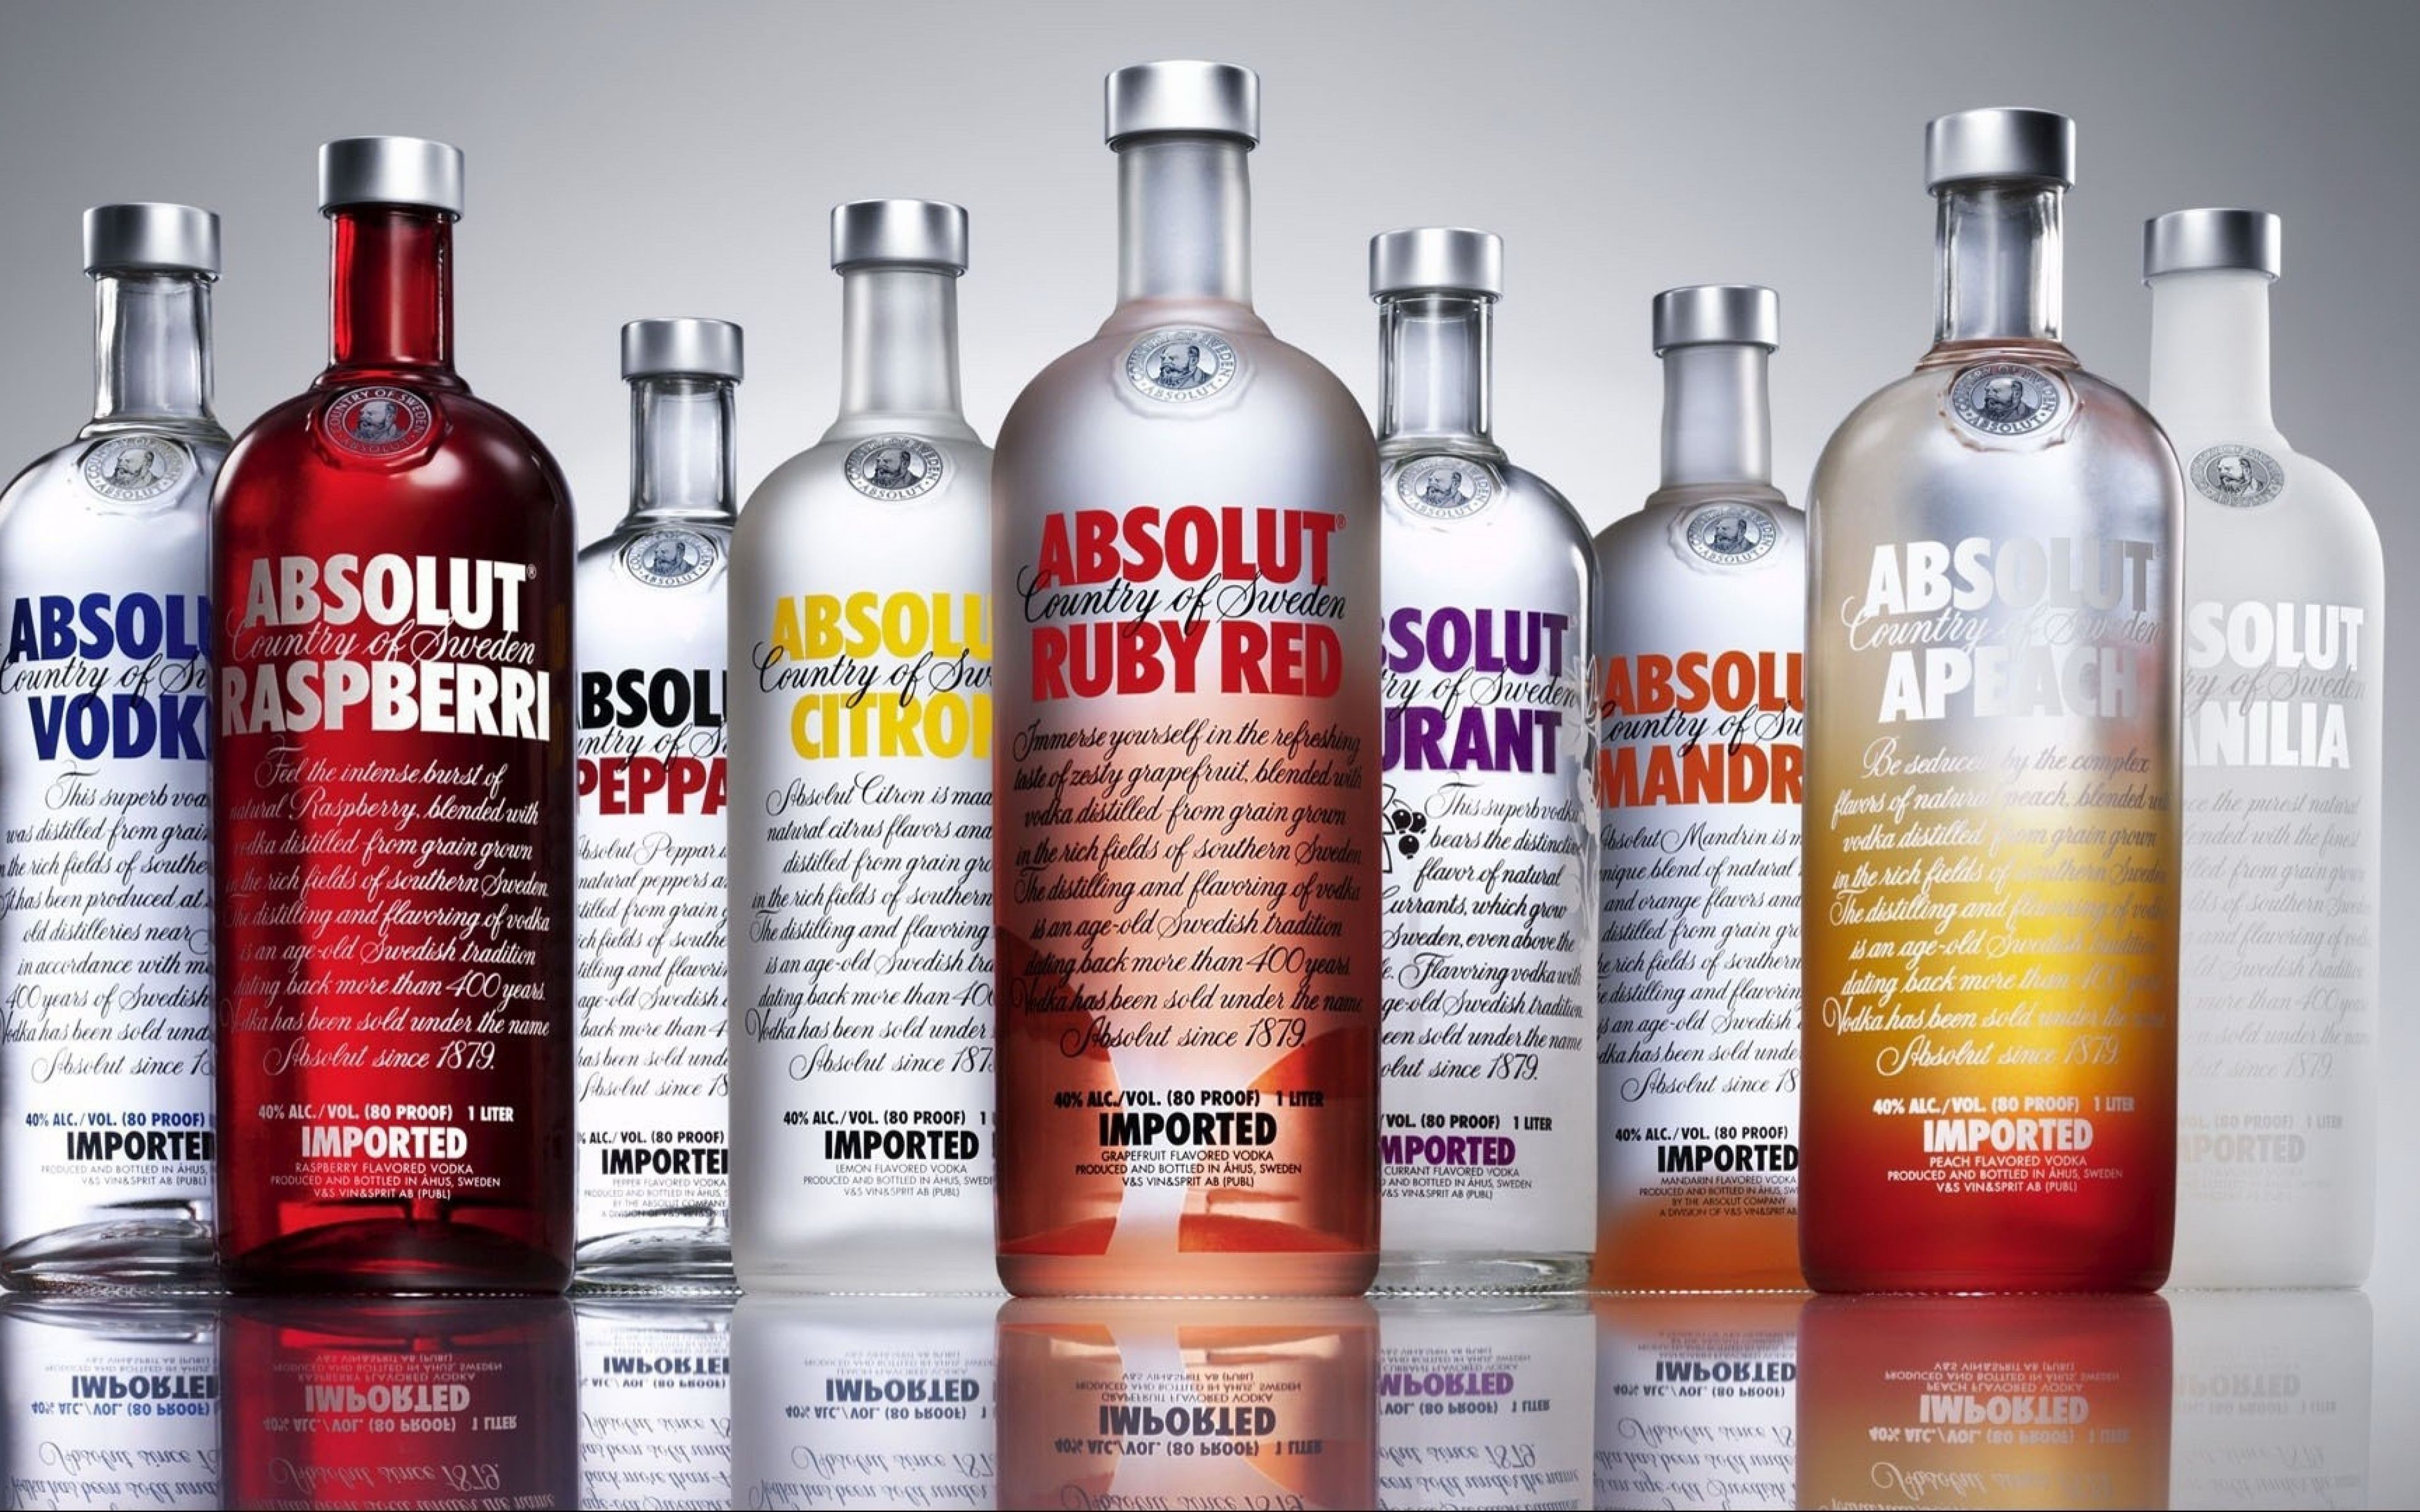 Download Wallpaper 3840x2400 Absolut, Vodka, Alcohol, Collection ...